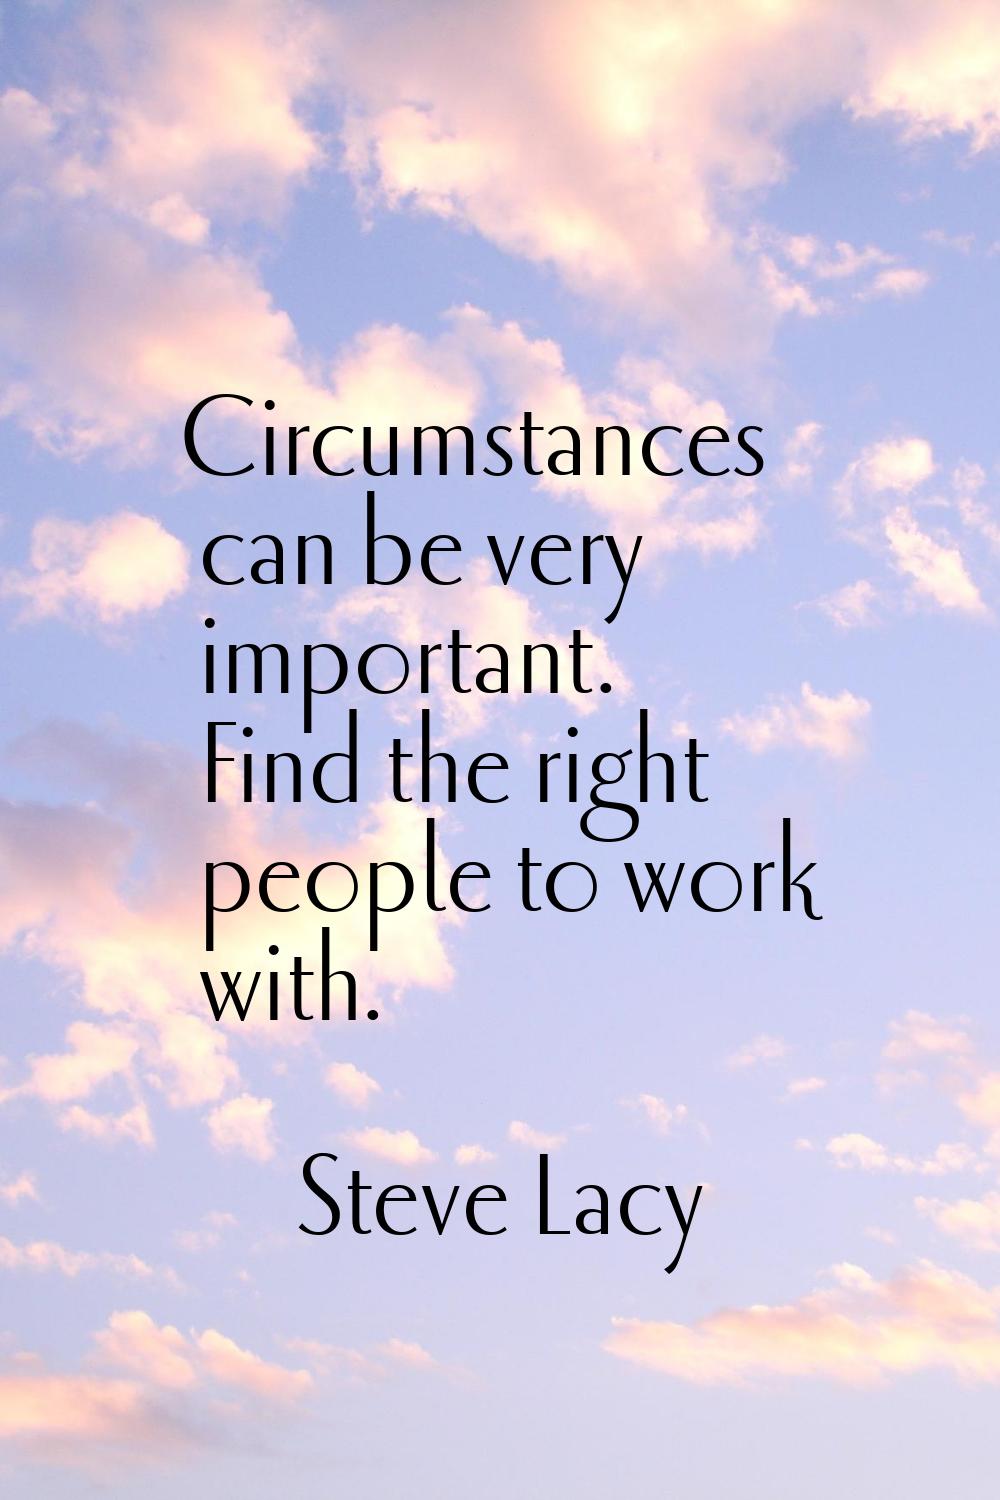 Circumstances can be very important. Find the right people to work with.